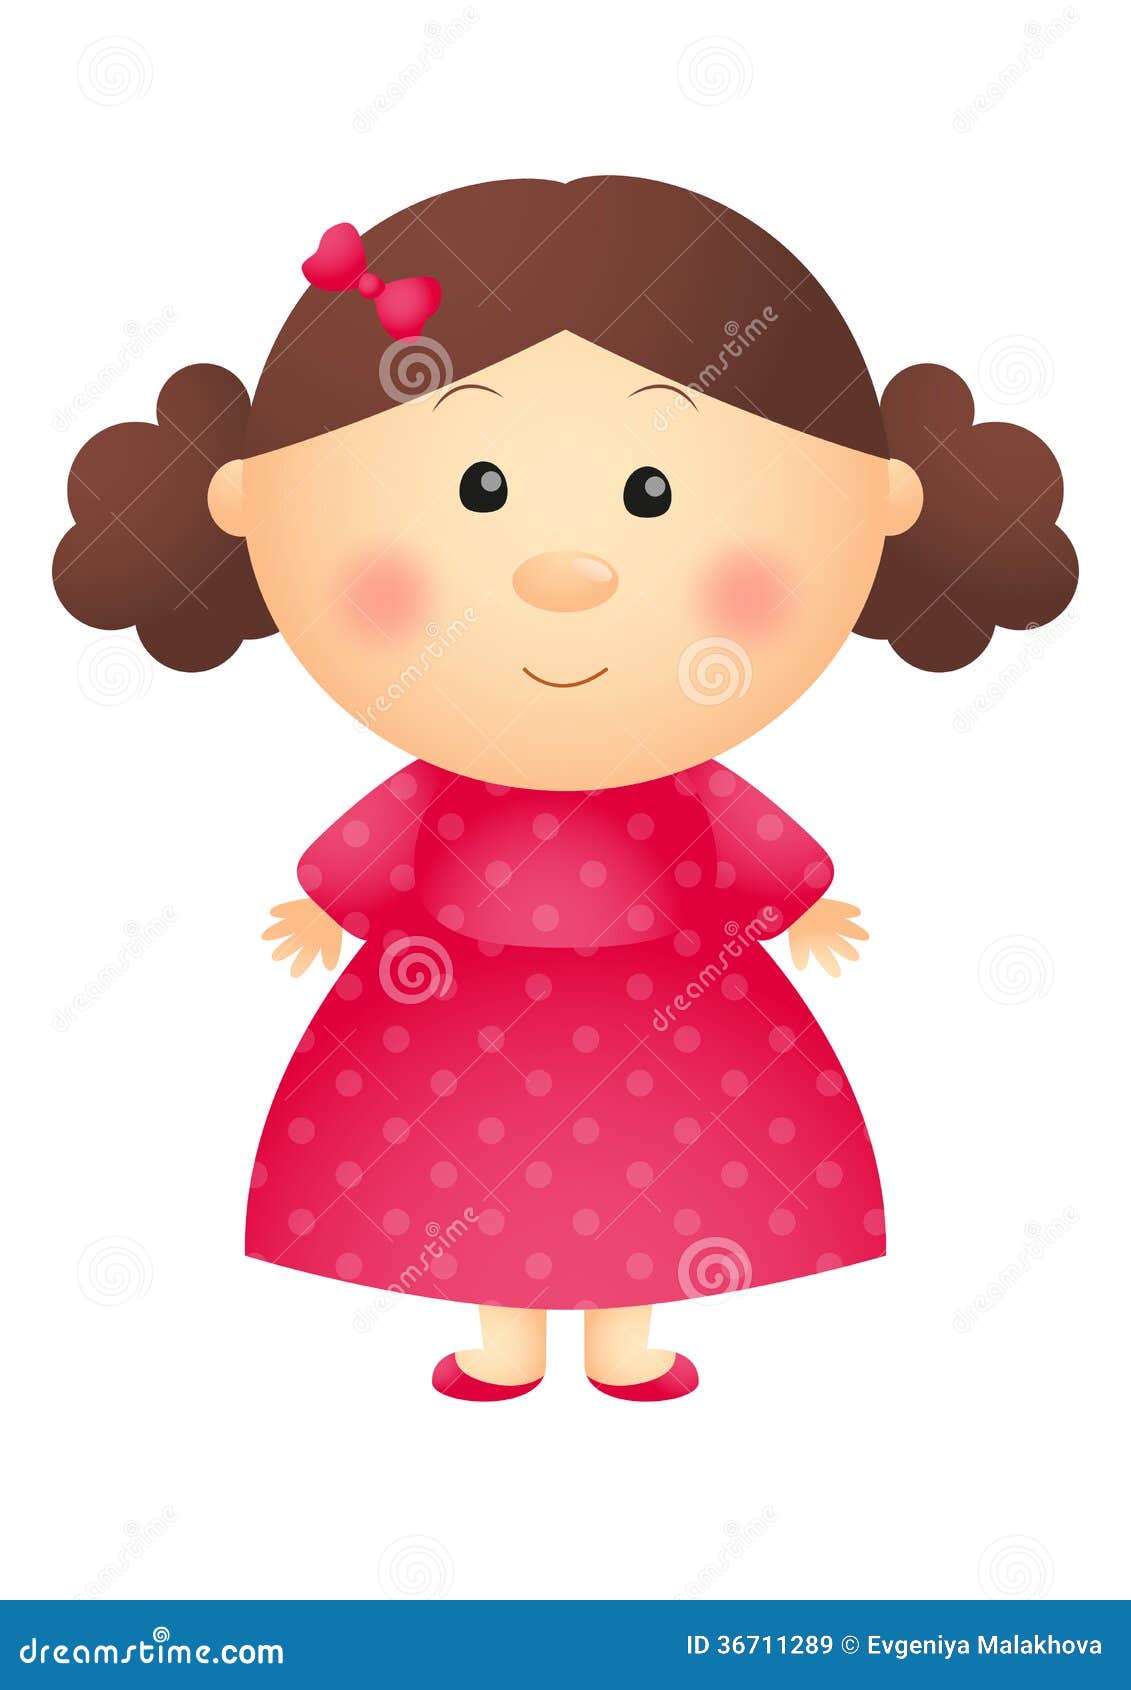 Cute little girl stock vector. Illustration of person - 36711289